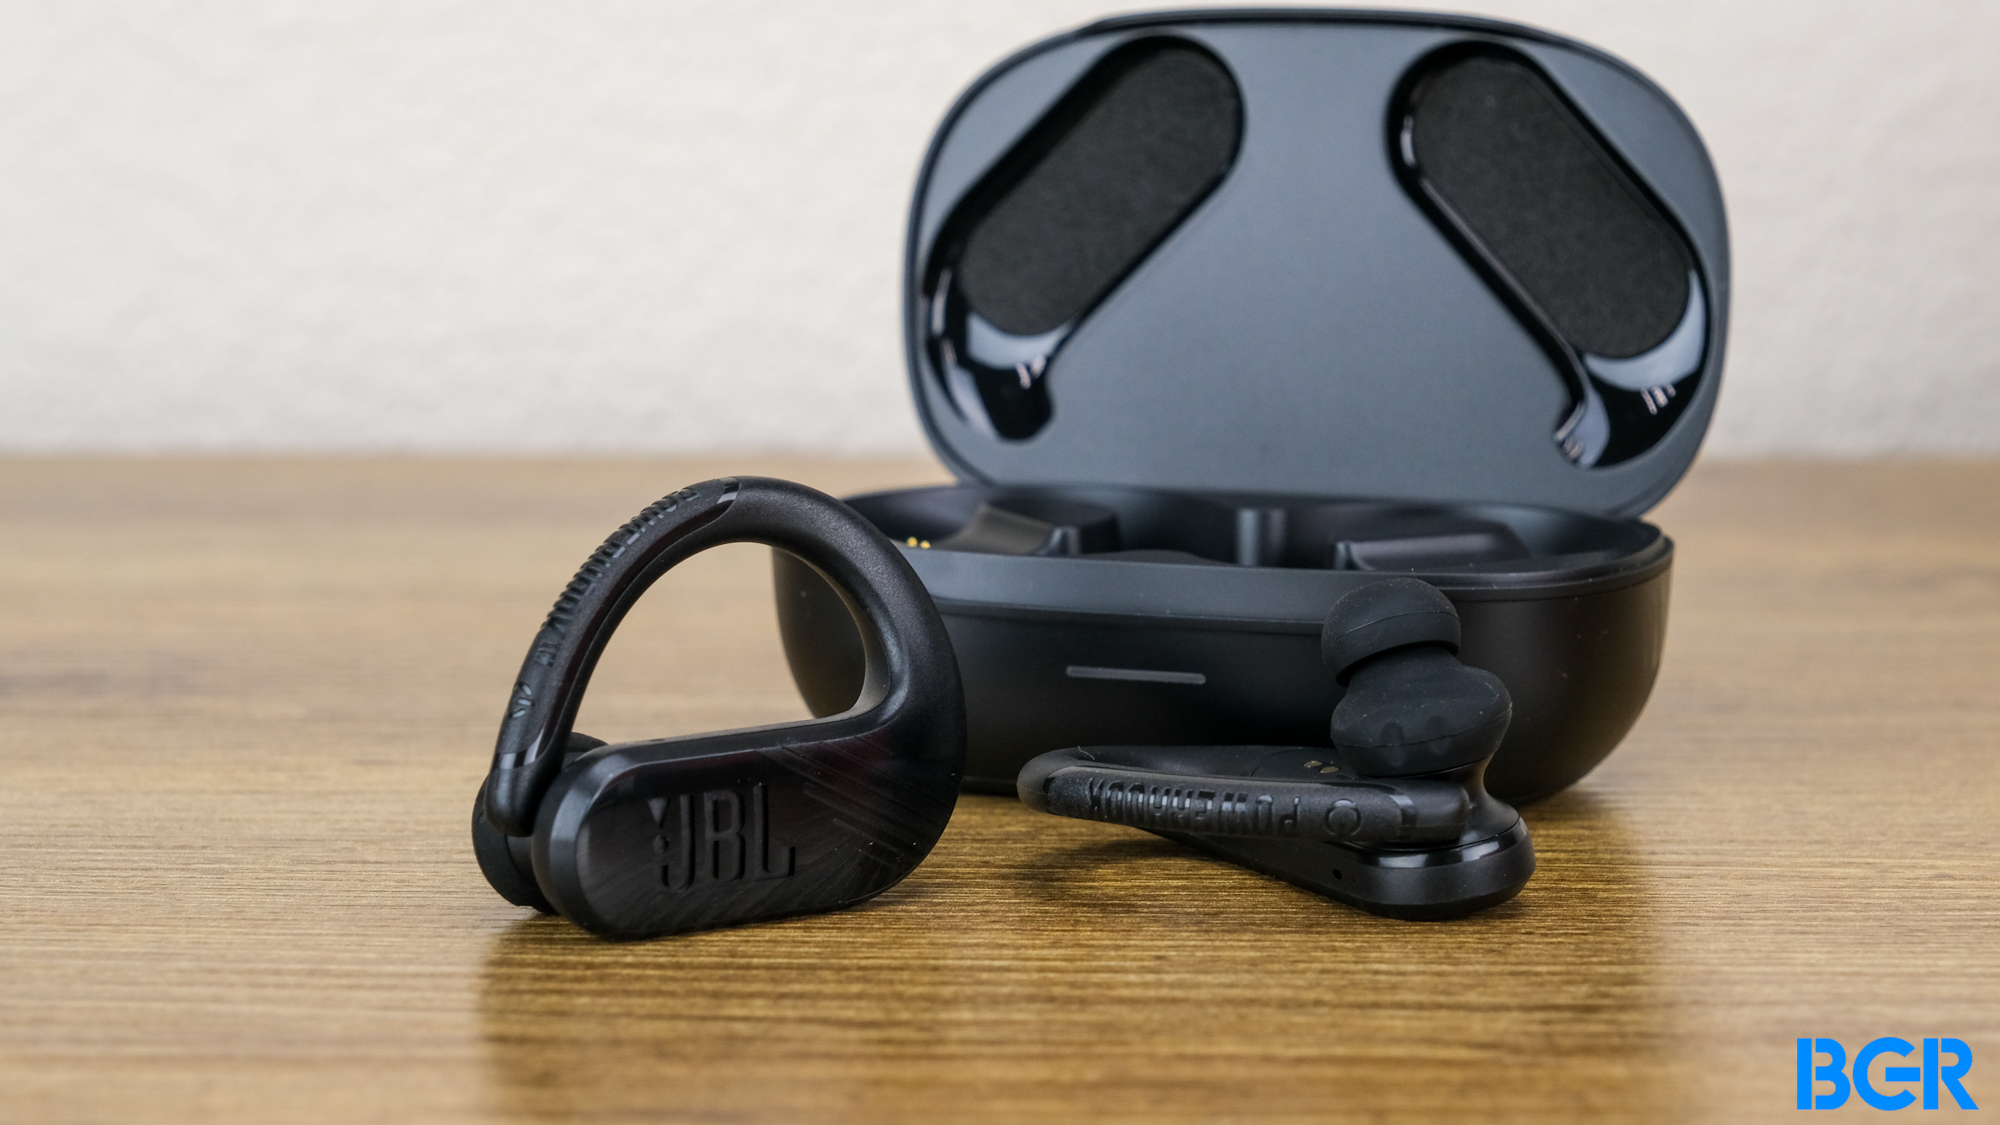 JBL Endurance Peak 3 wireless earbuds review: Great sports buds at